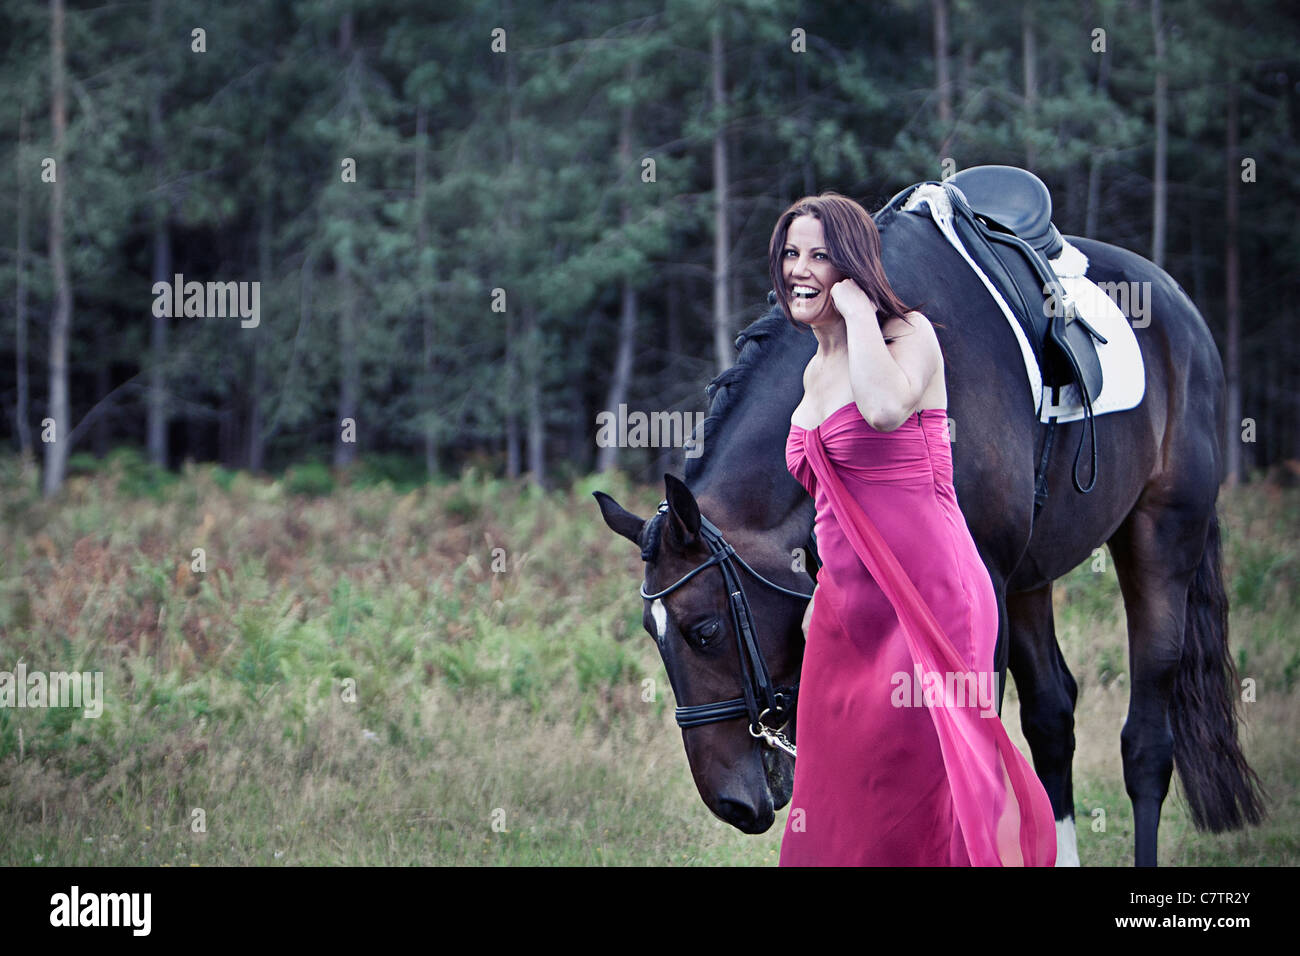 Beautiful Photo of Woman in Pink Dress with Horse in Forest Location Stock Photo